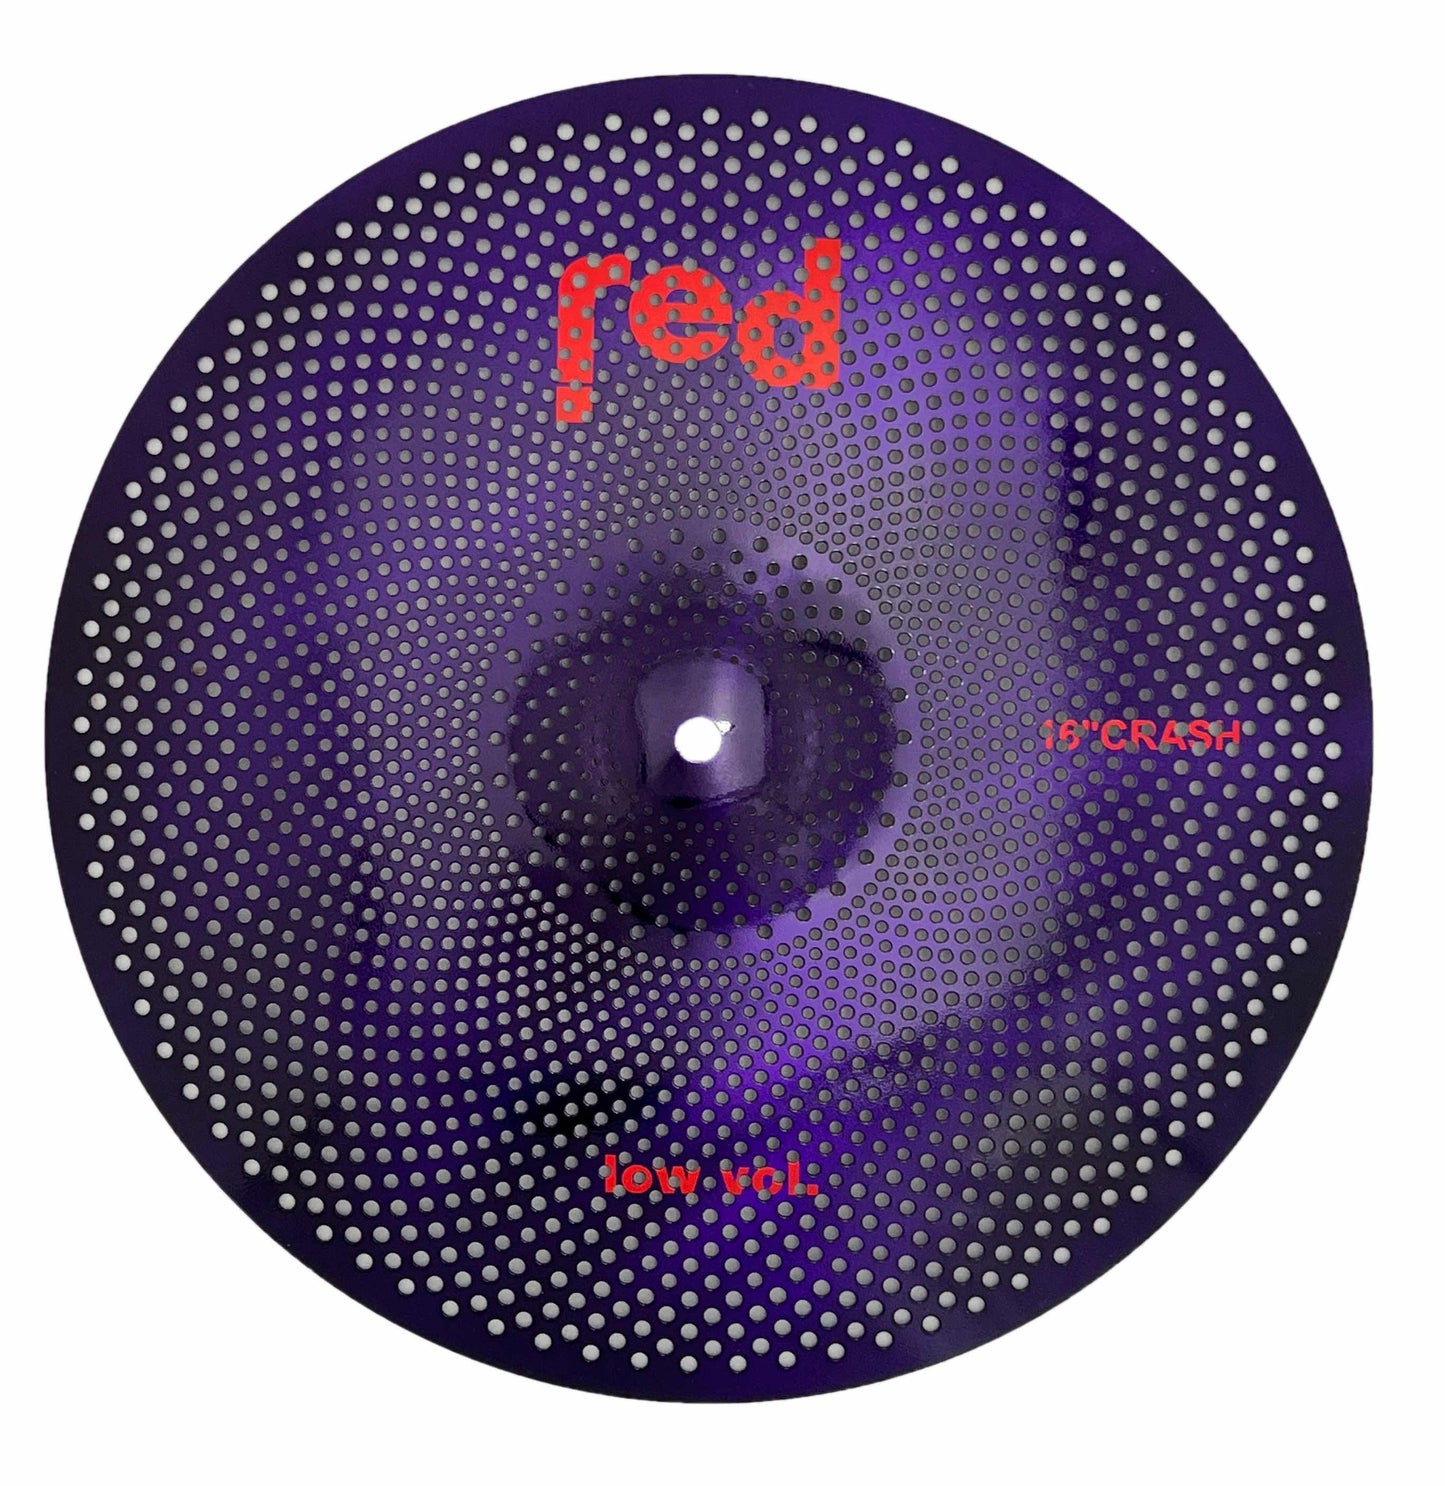 Low Volume 20" Ride Cymbal